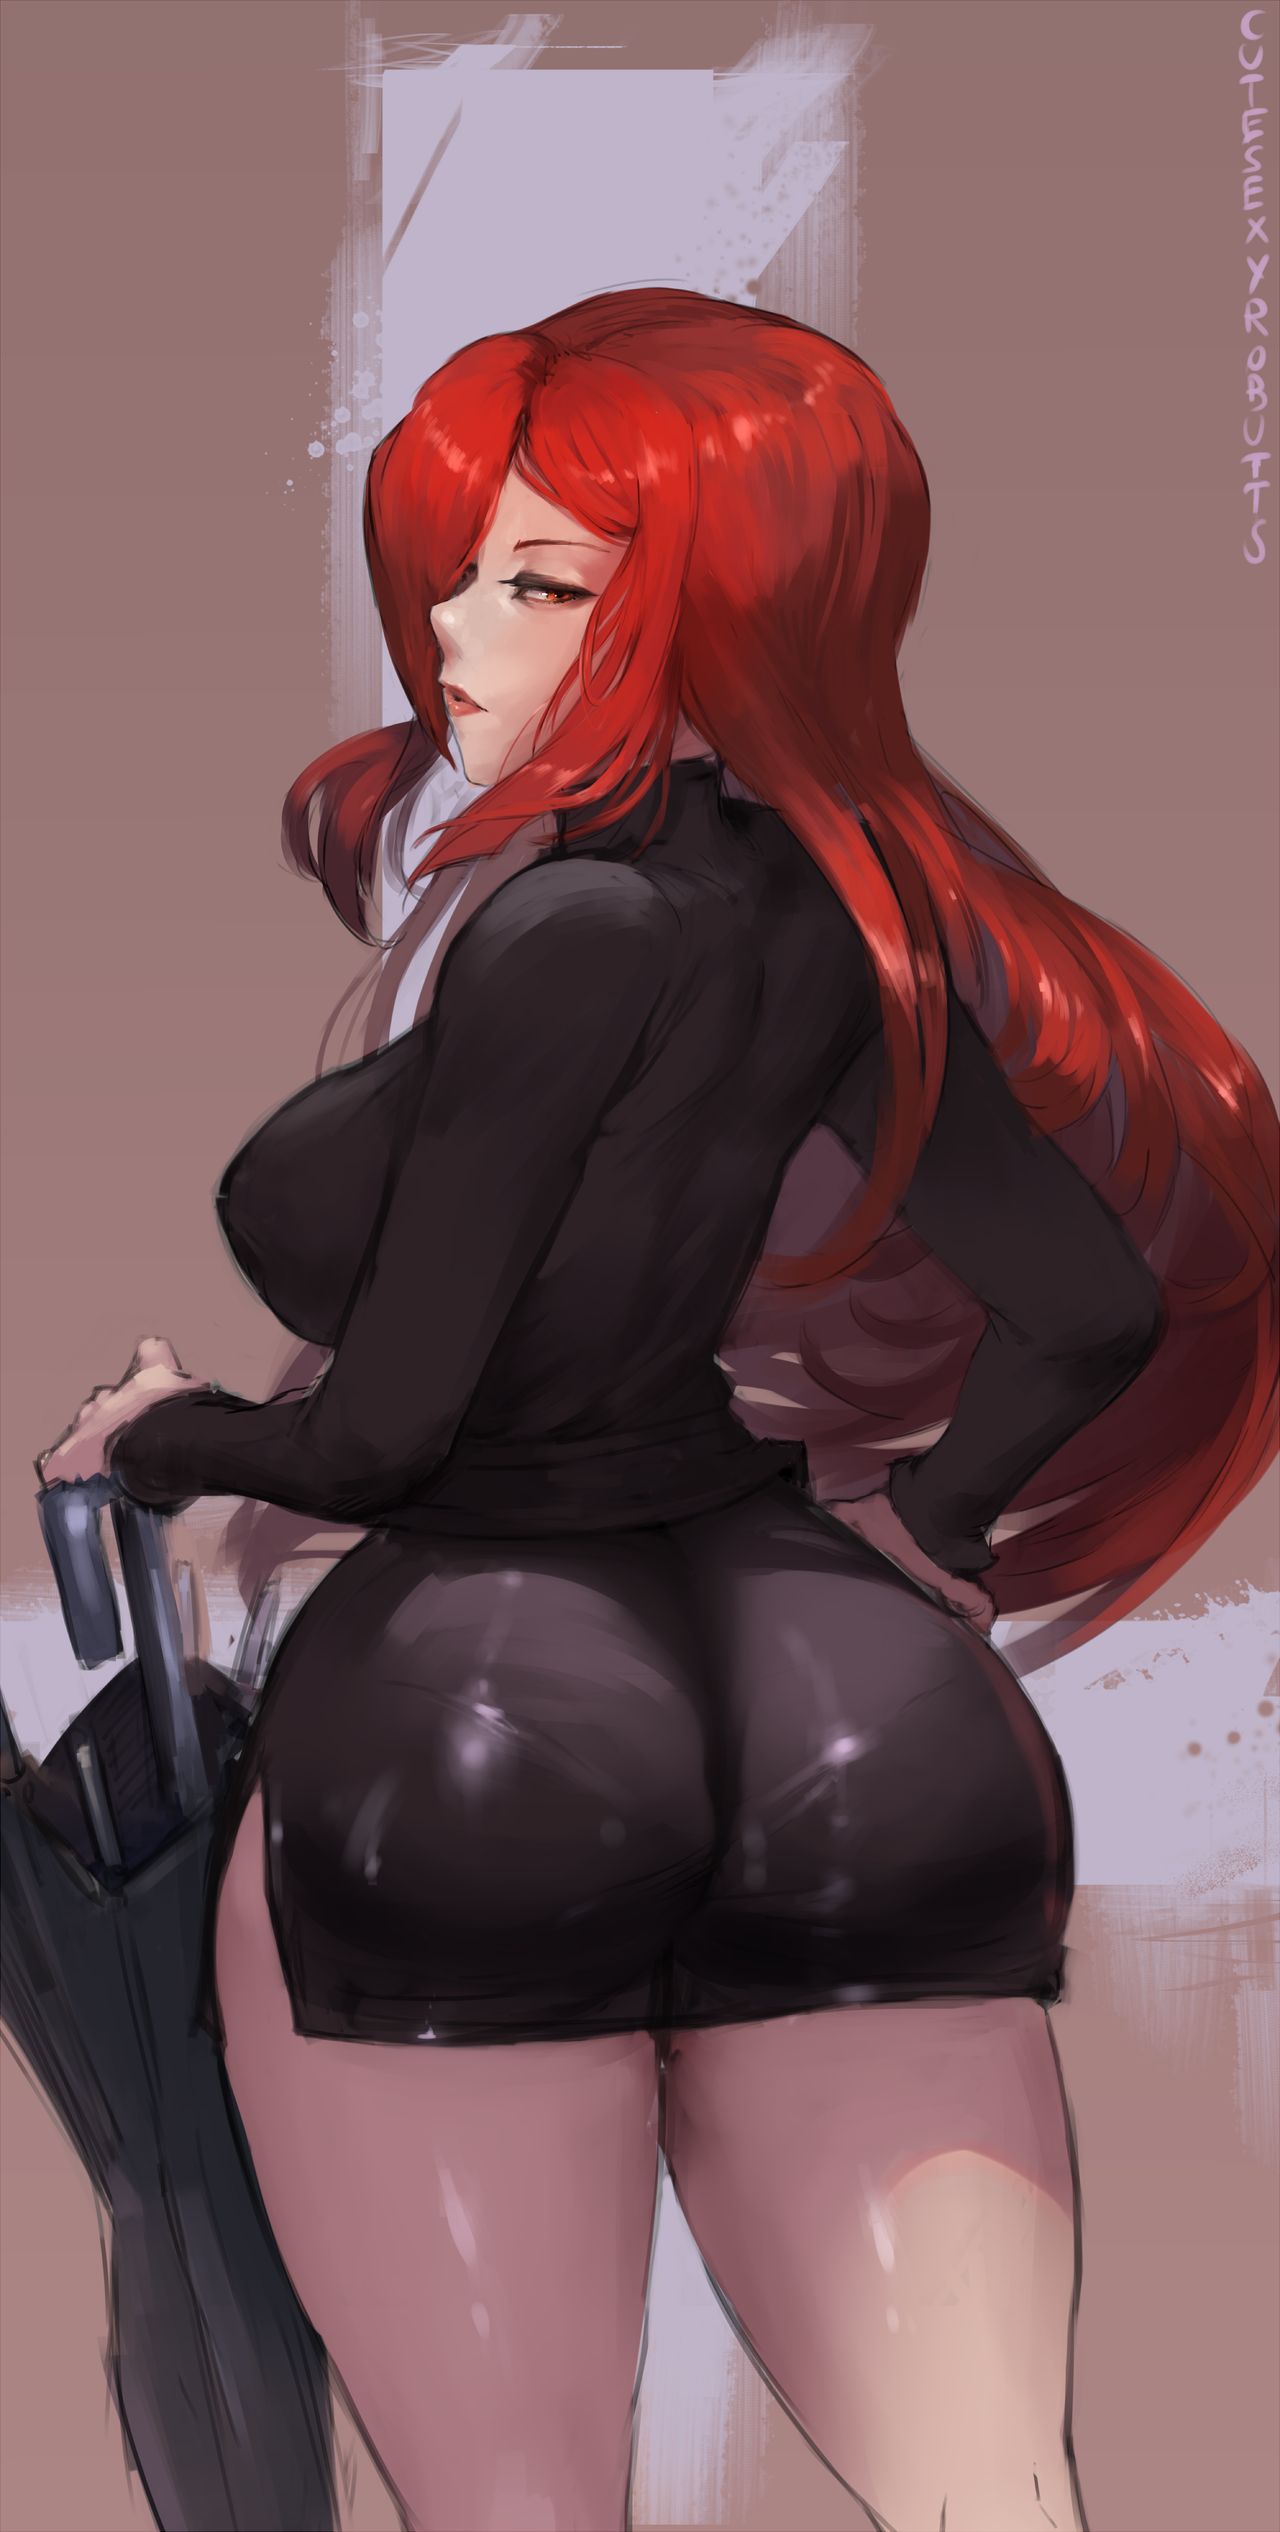 Artist - cutesexyrobutts (up to 16/02/19) 63